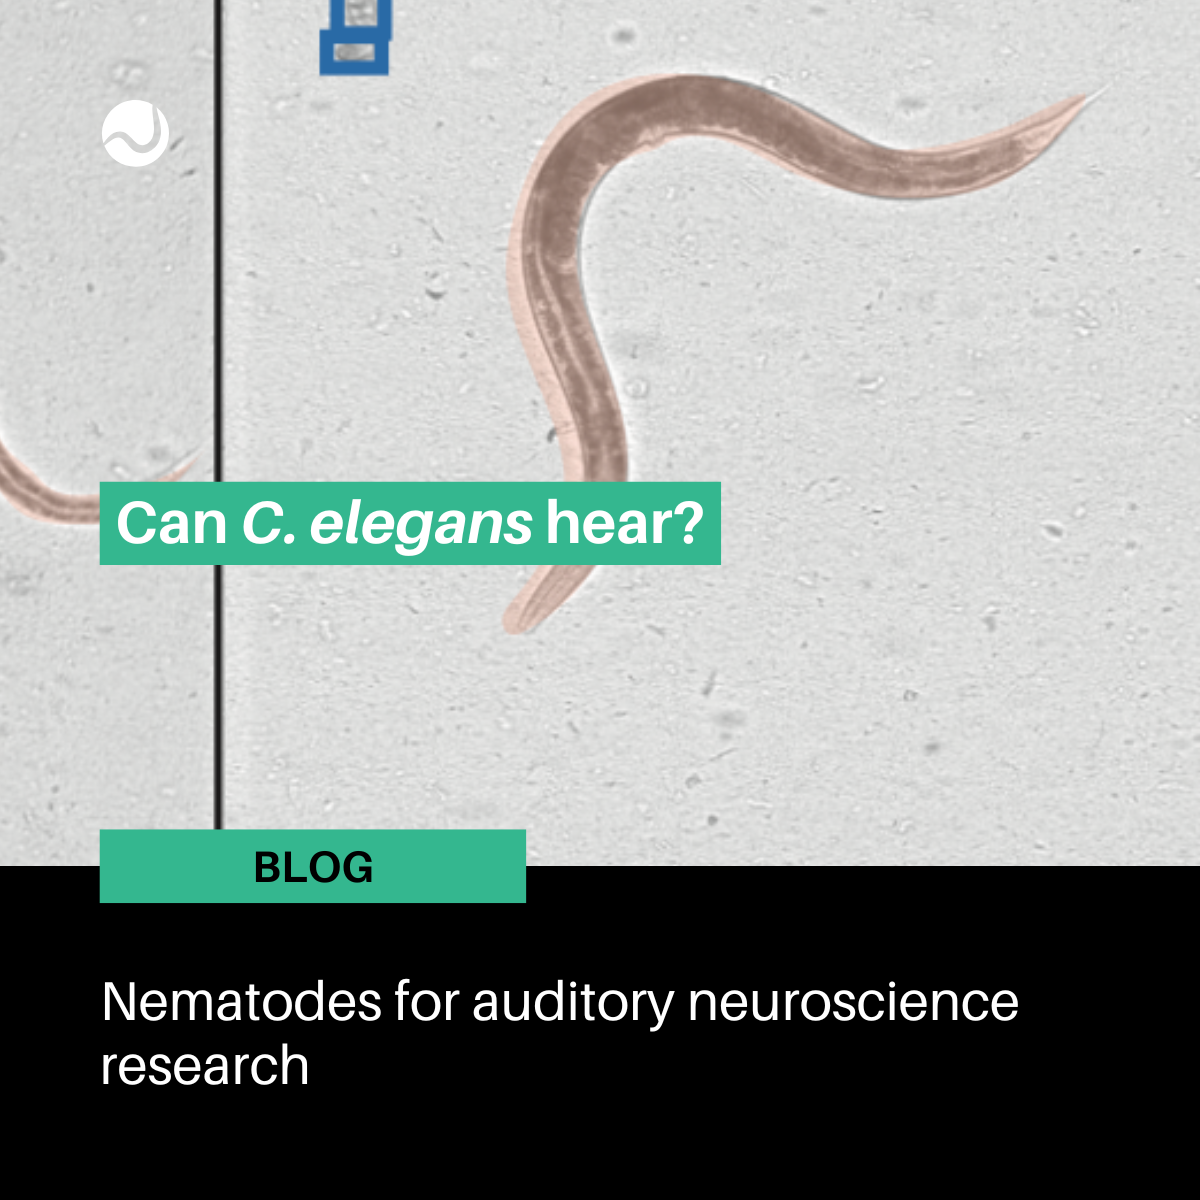 Can C. elegans hear? Nematodes for auditory neuroscience research